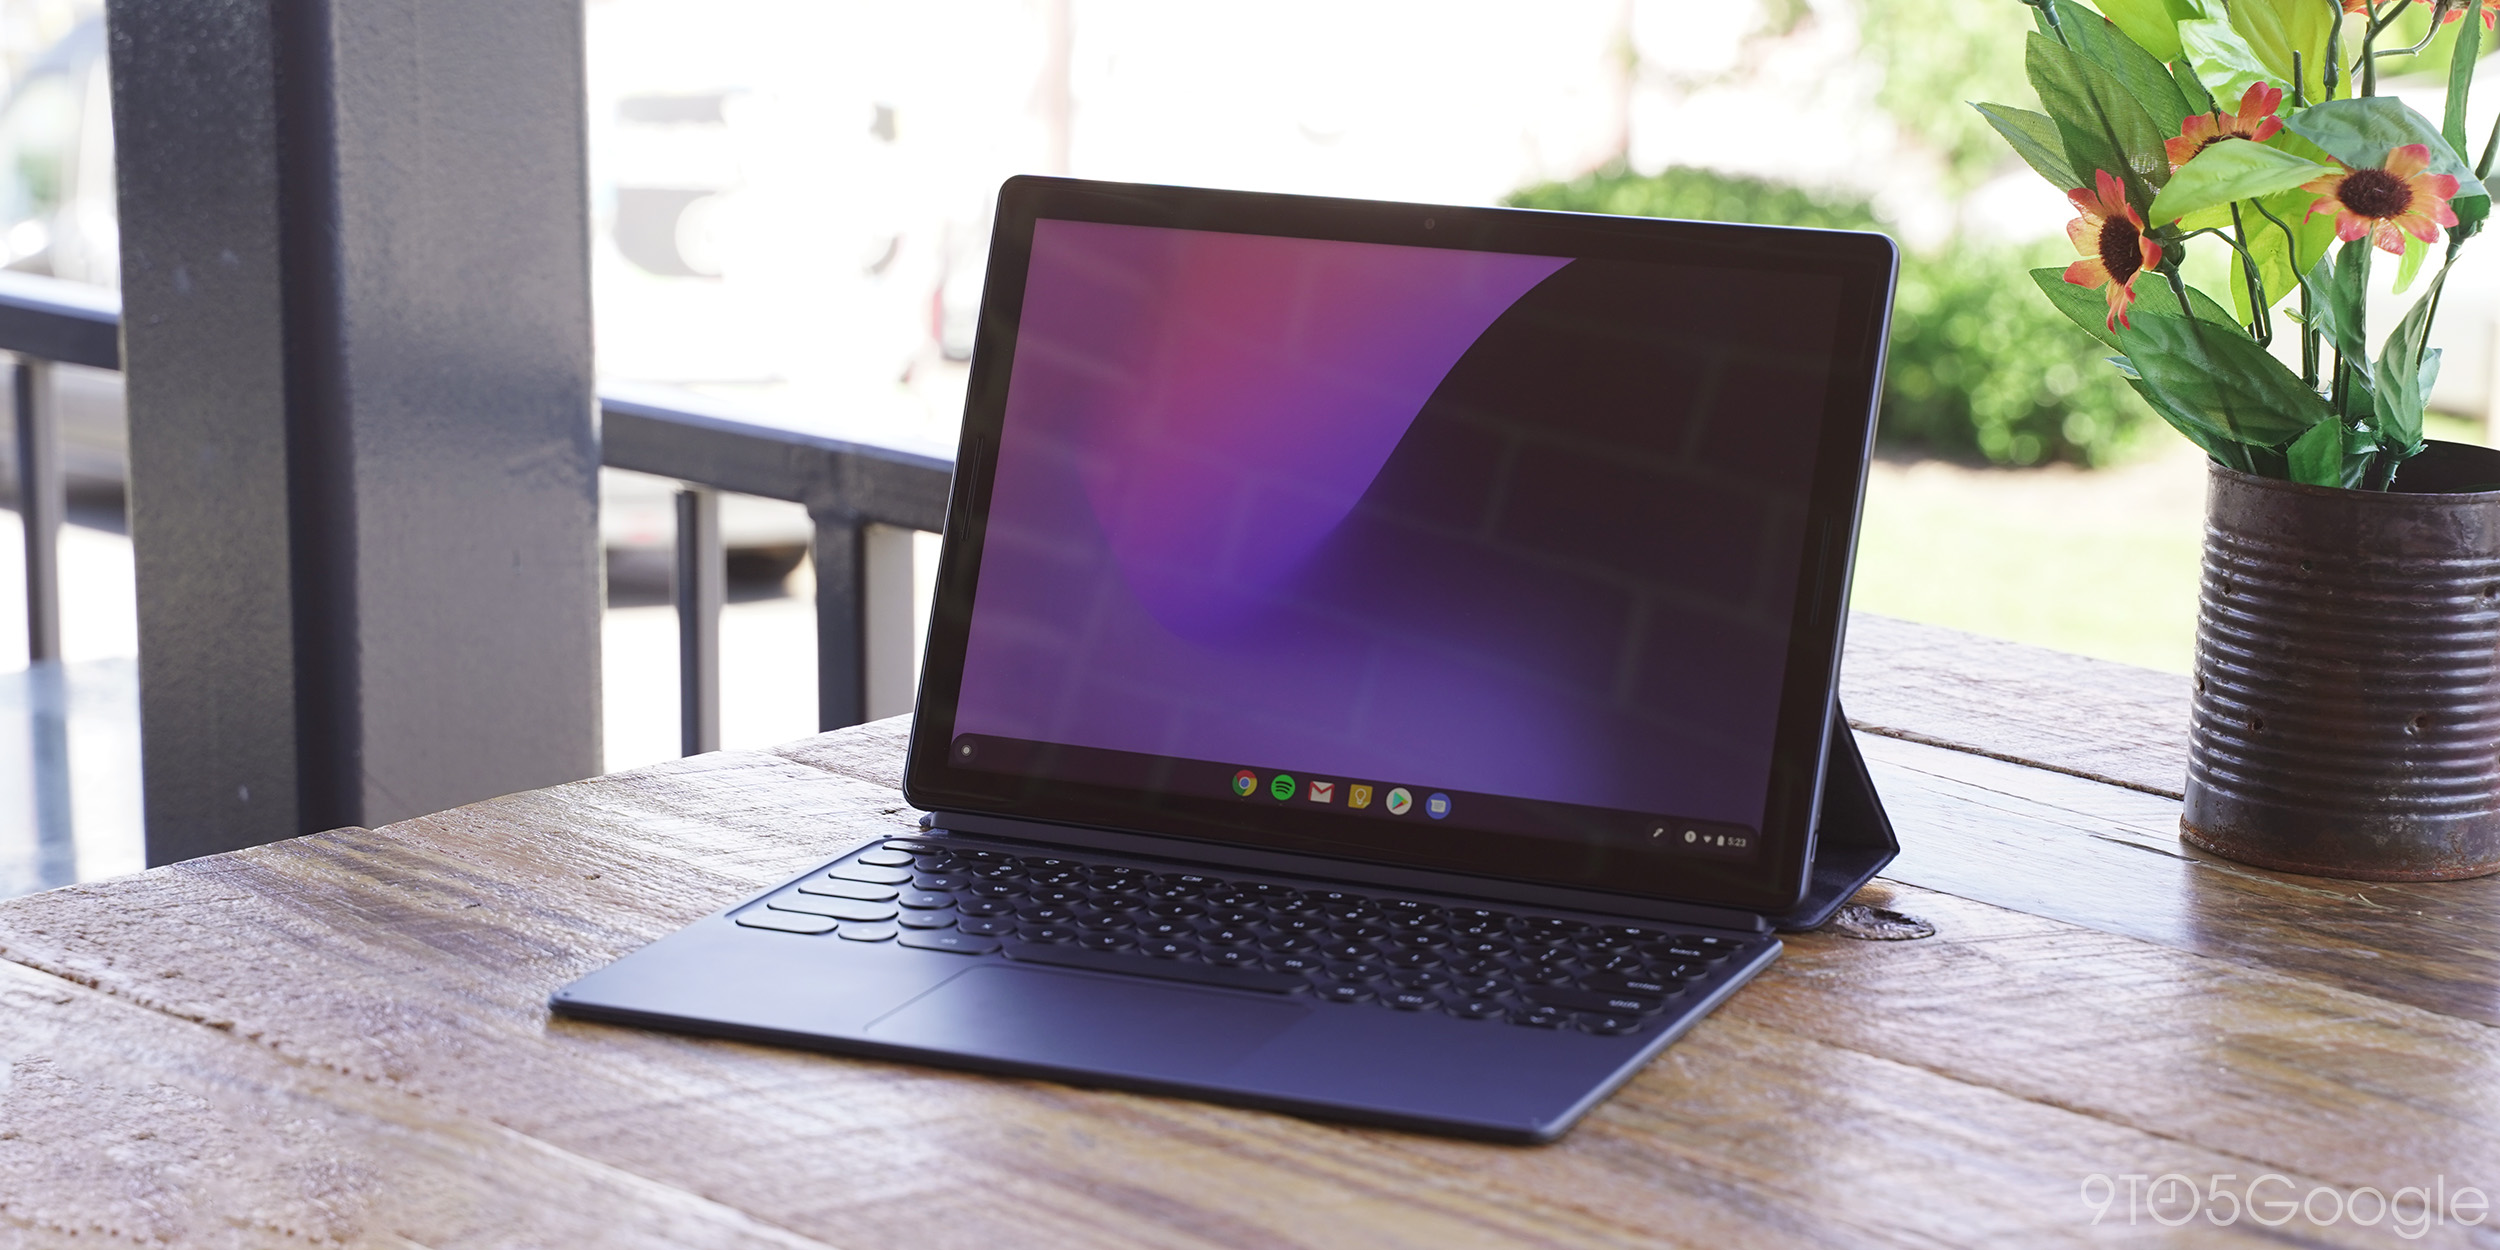 Pixel Slate m3: Is Google's new base model worth buying? - 9to5Google